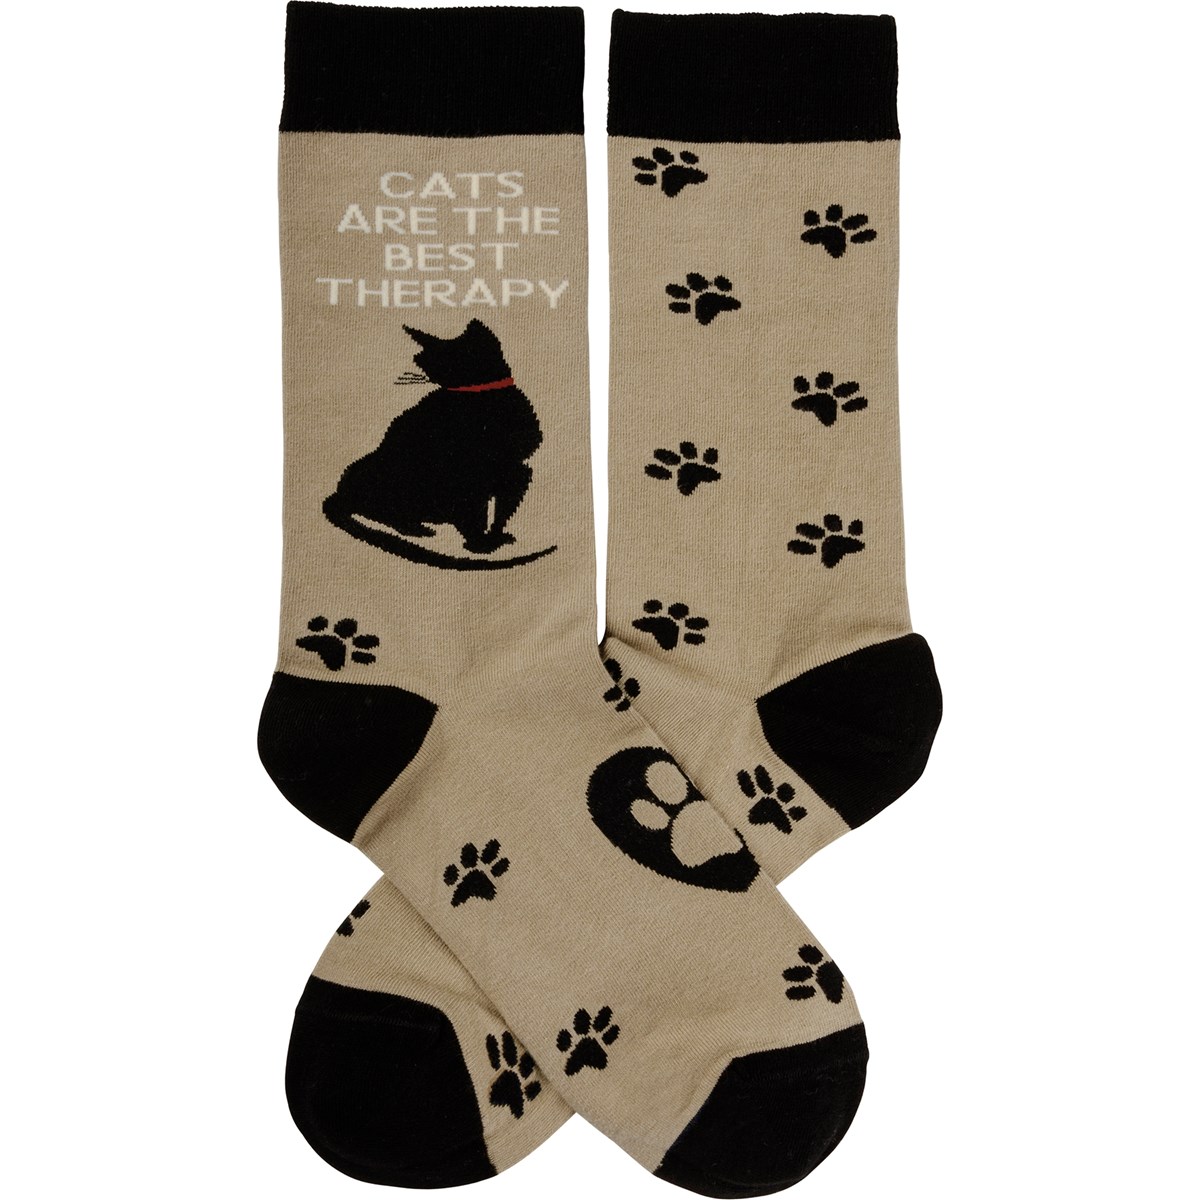 Cats Are The Best Therapy Socks - Cotton, Nylon, Spandex